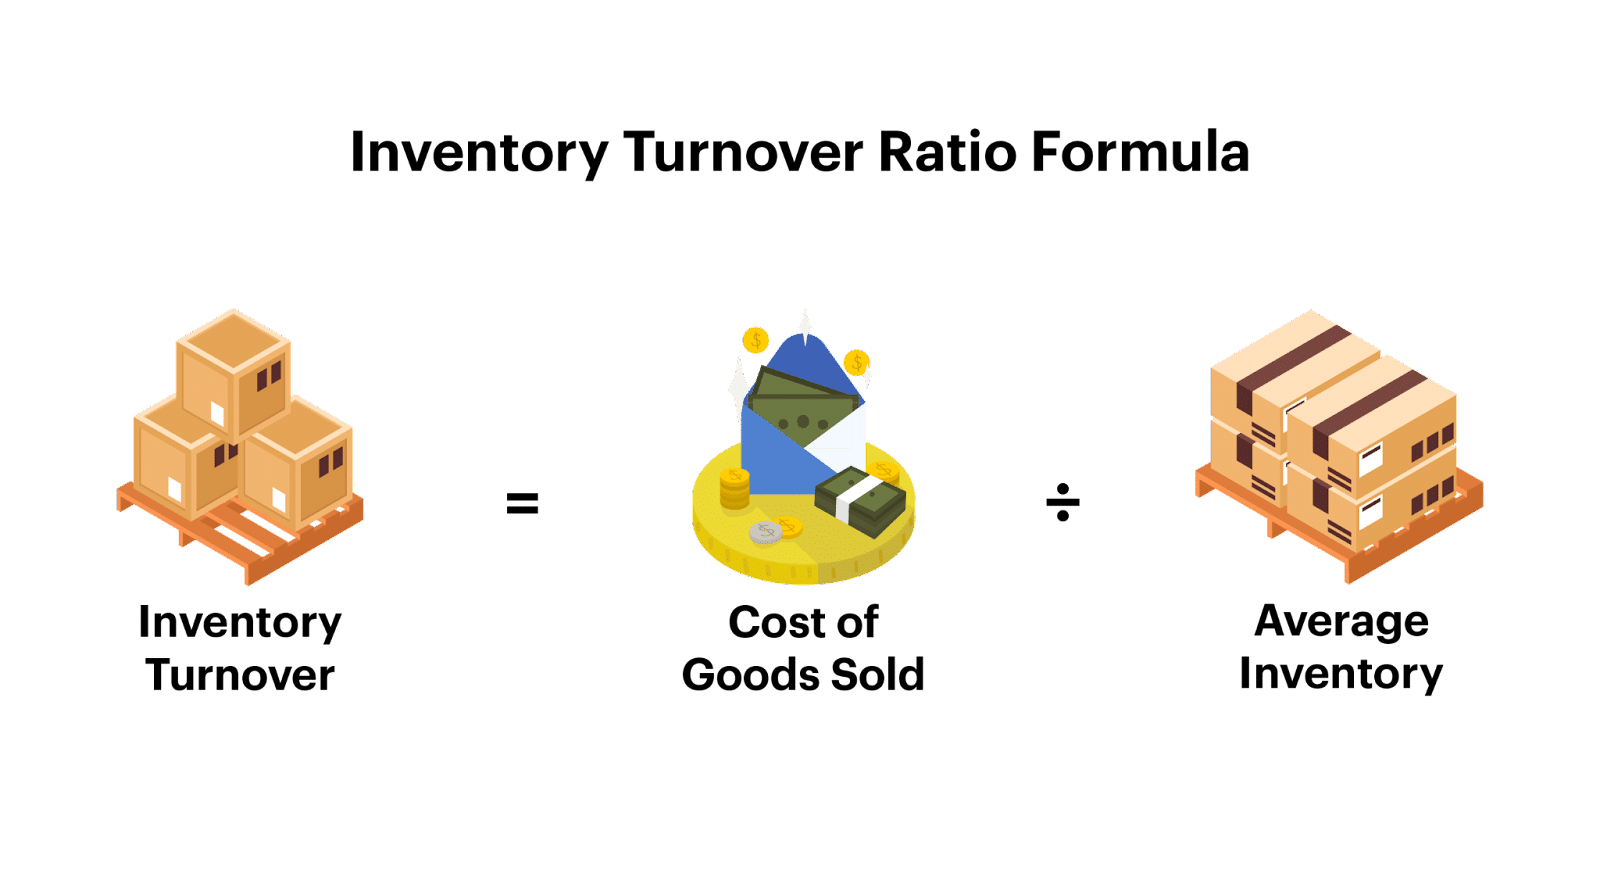 inventory turn over